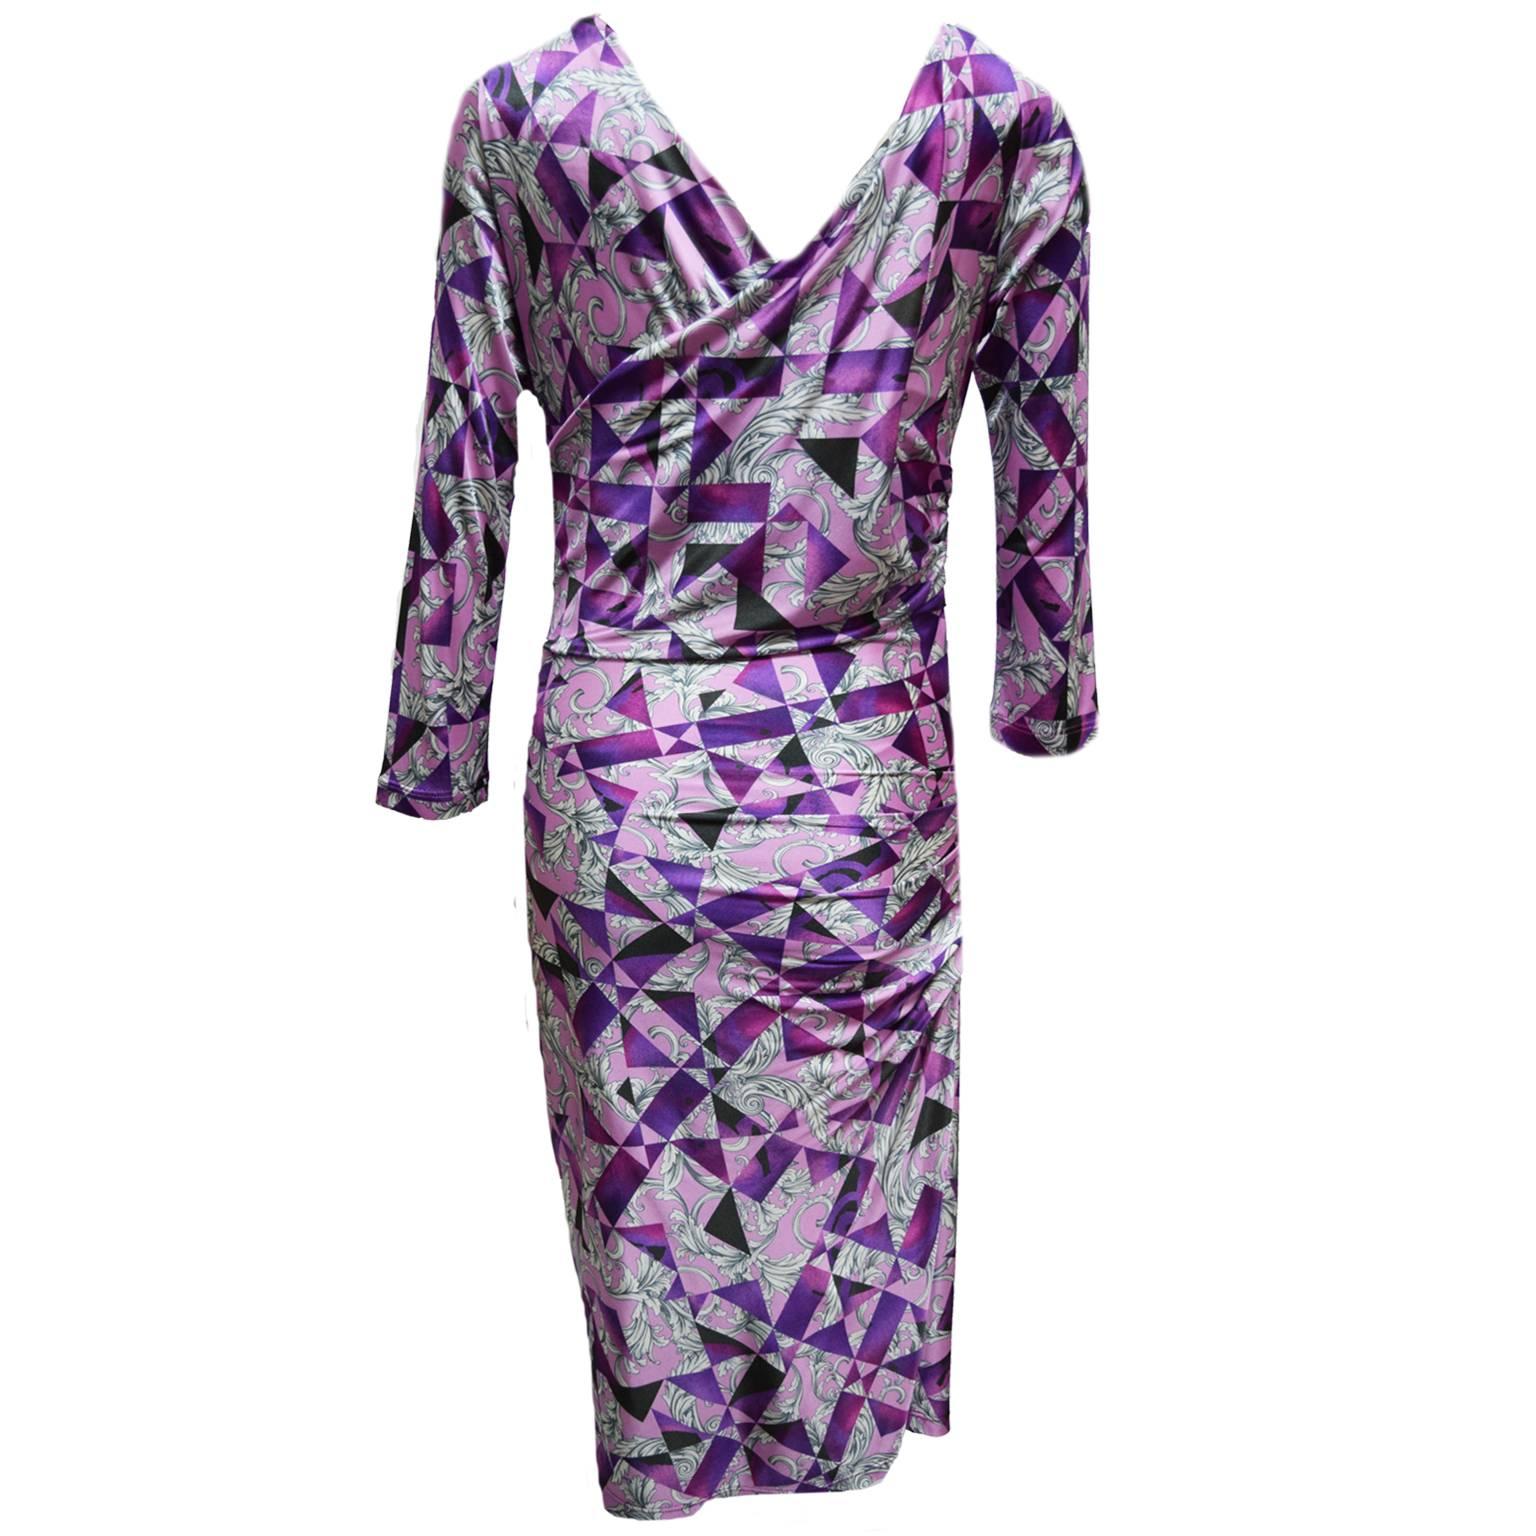 This beautiful dress designed by Versace is the epitome of the classic italian look. Made from the signature Versace baroque print, blended with tints and shades of a purple monochromatic palette, this creates a beautiful contrasted statement. The